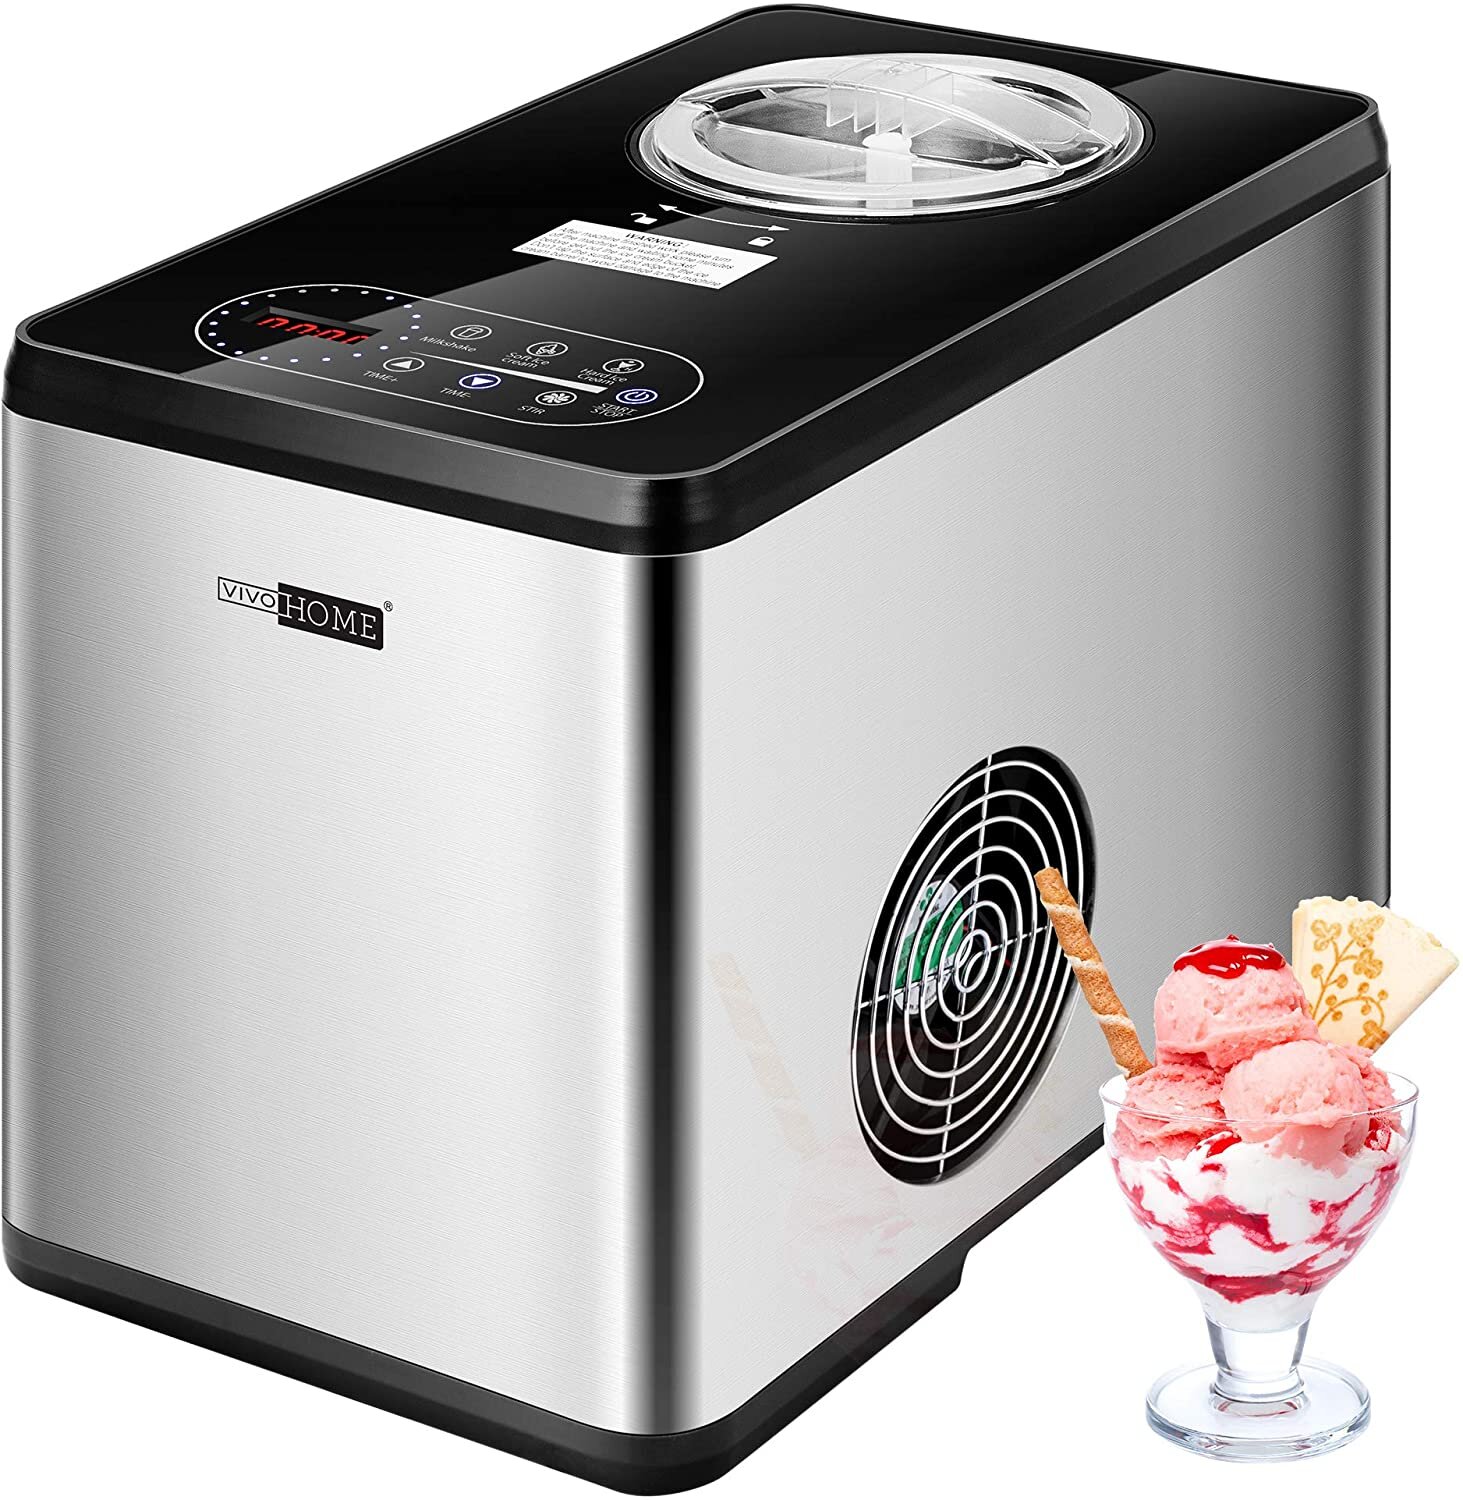 Whynter - Ice Cream Maker 2 Quart Capacity Stainless Steel Bowl & Yogurt Function in Champagne Gold | ICM-220CGY